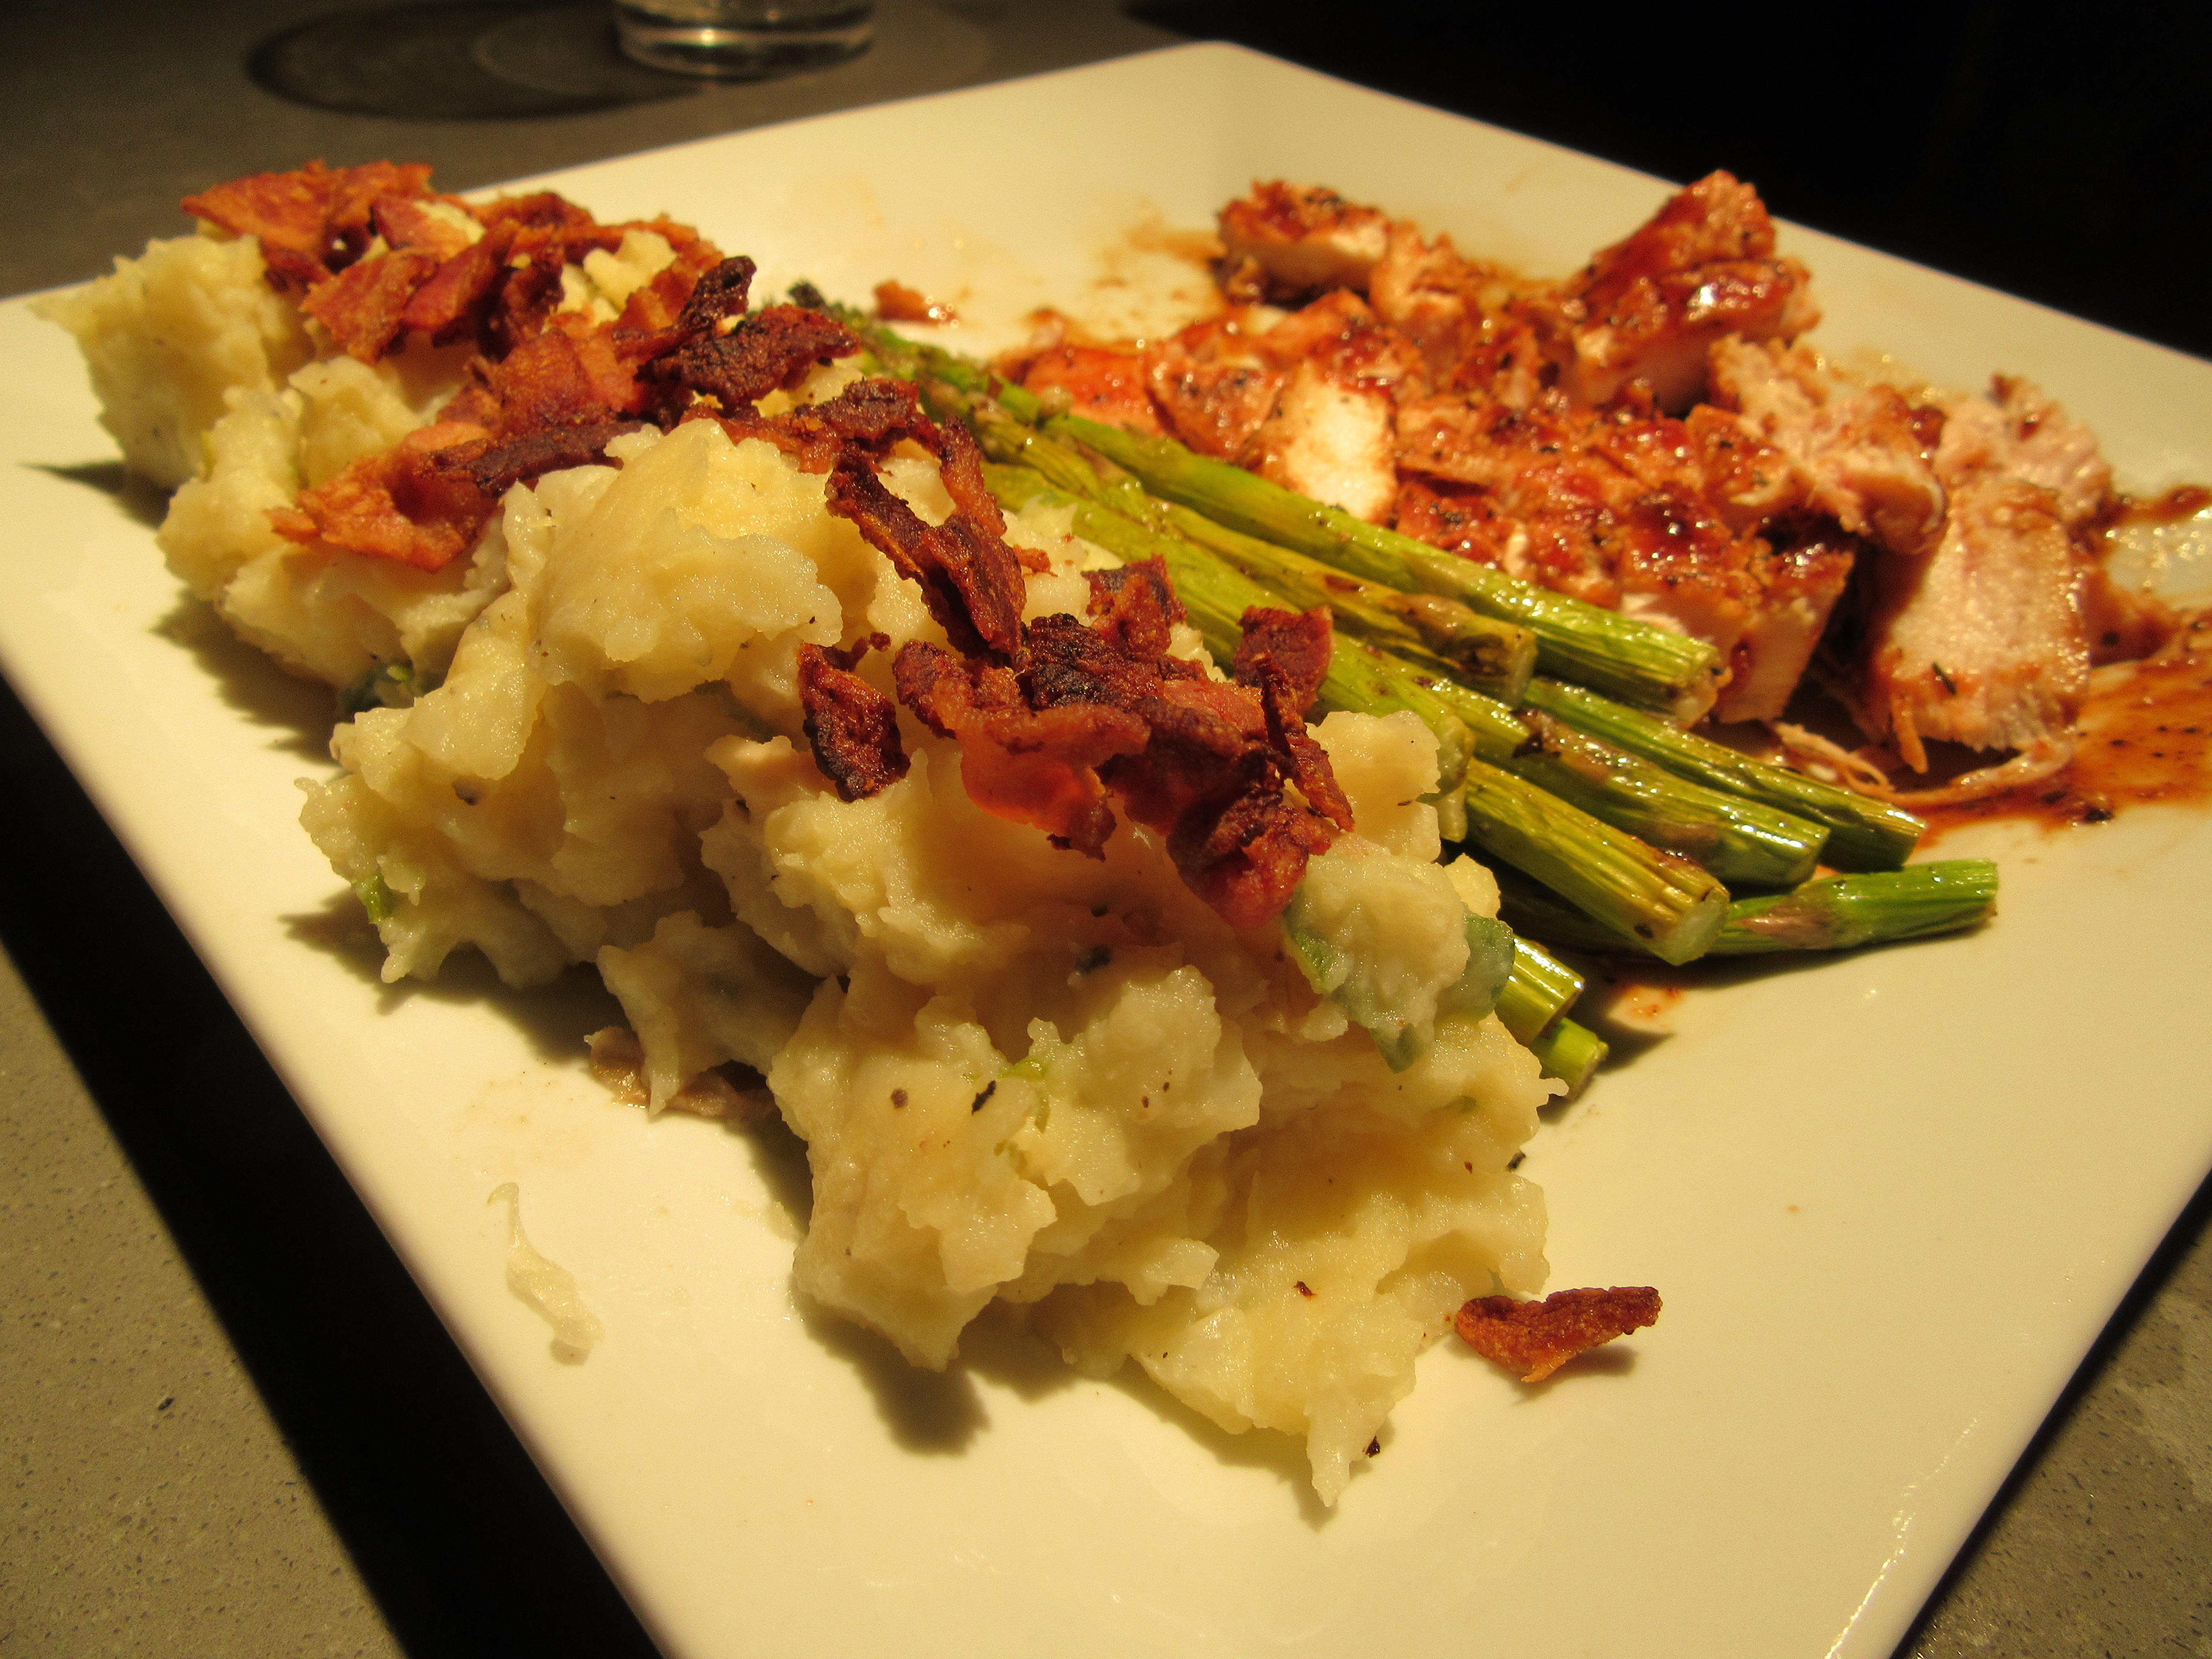 at home date nights: the perfect side – smashed potatoes